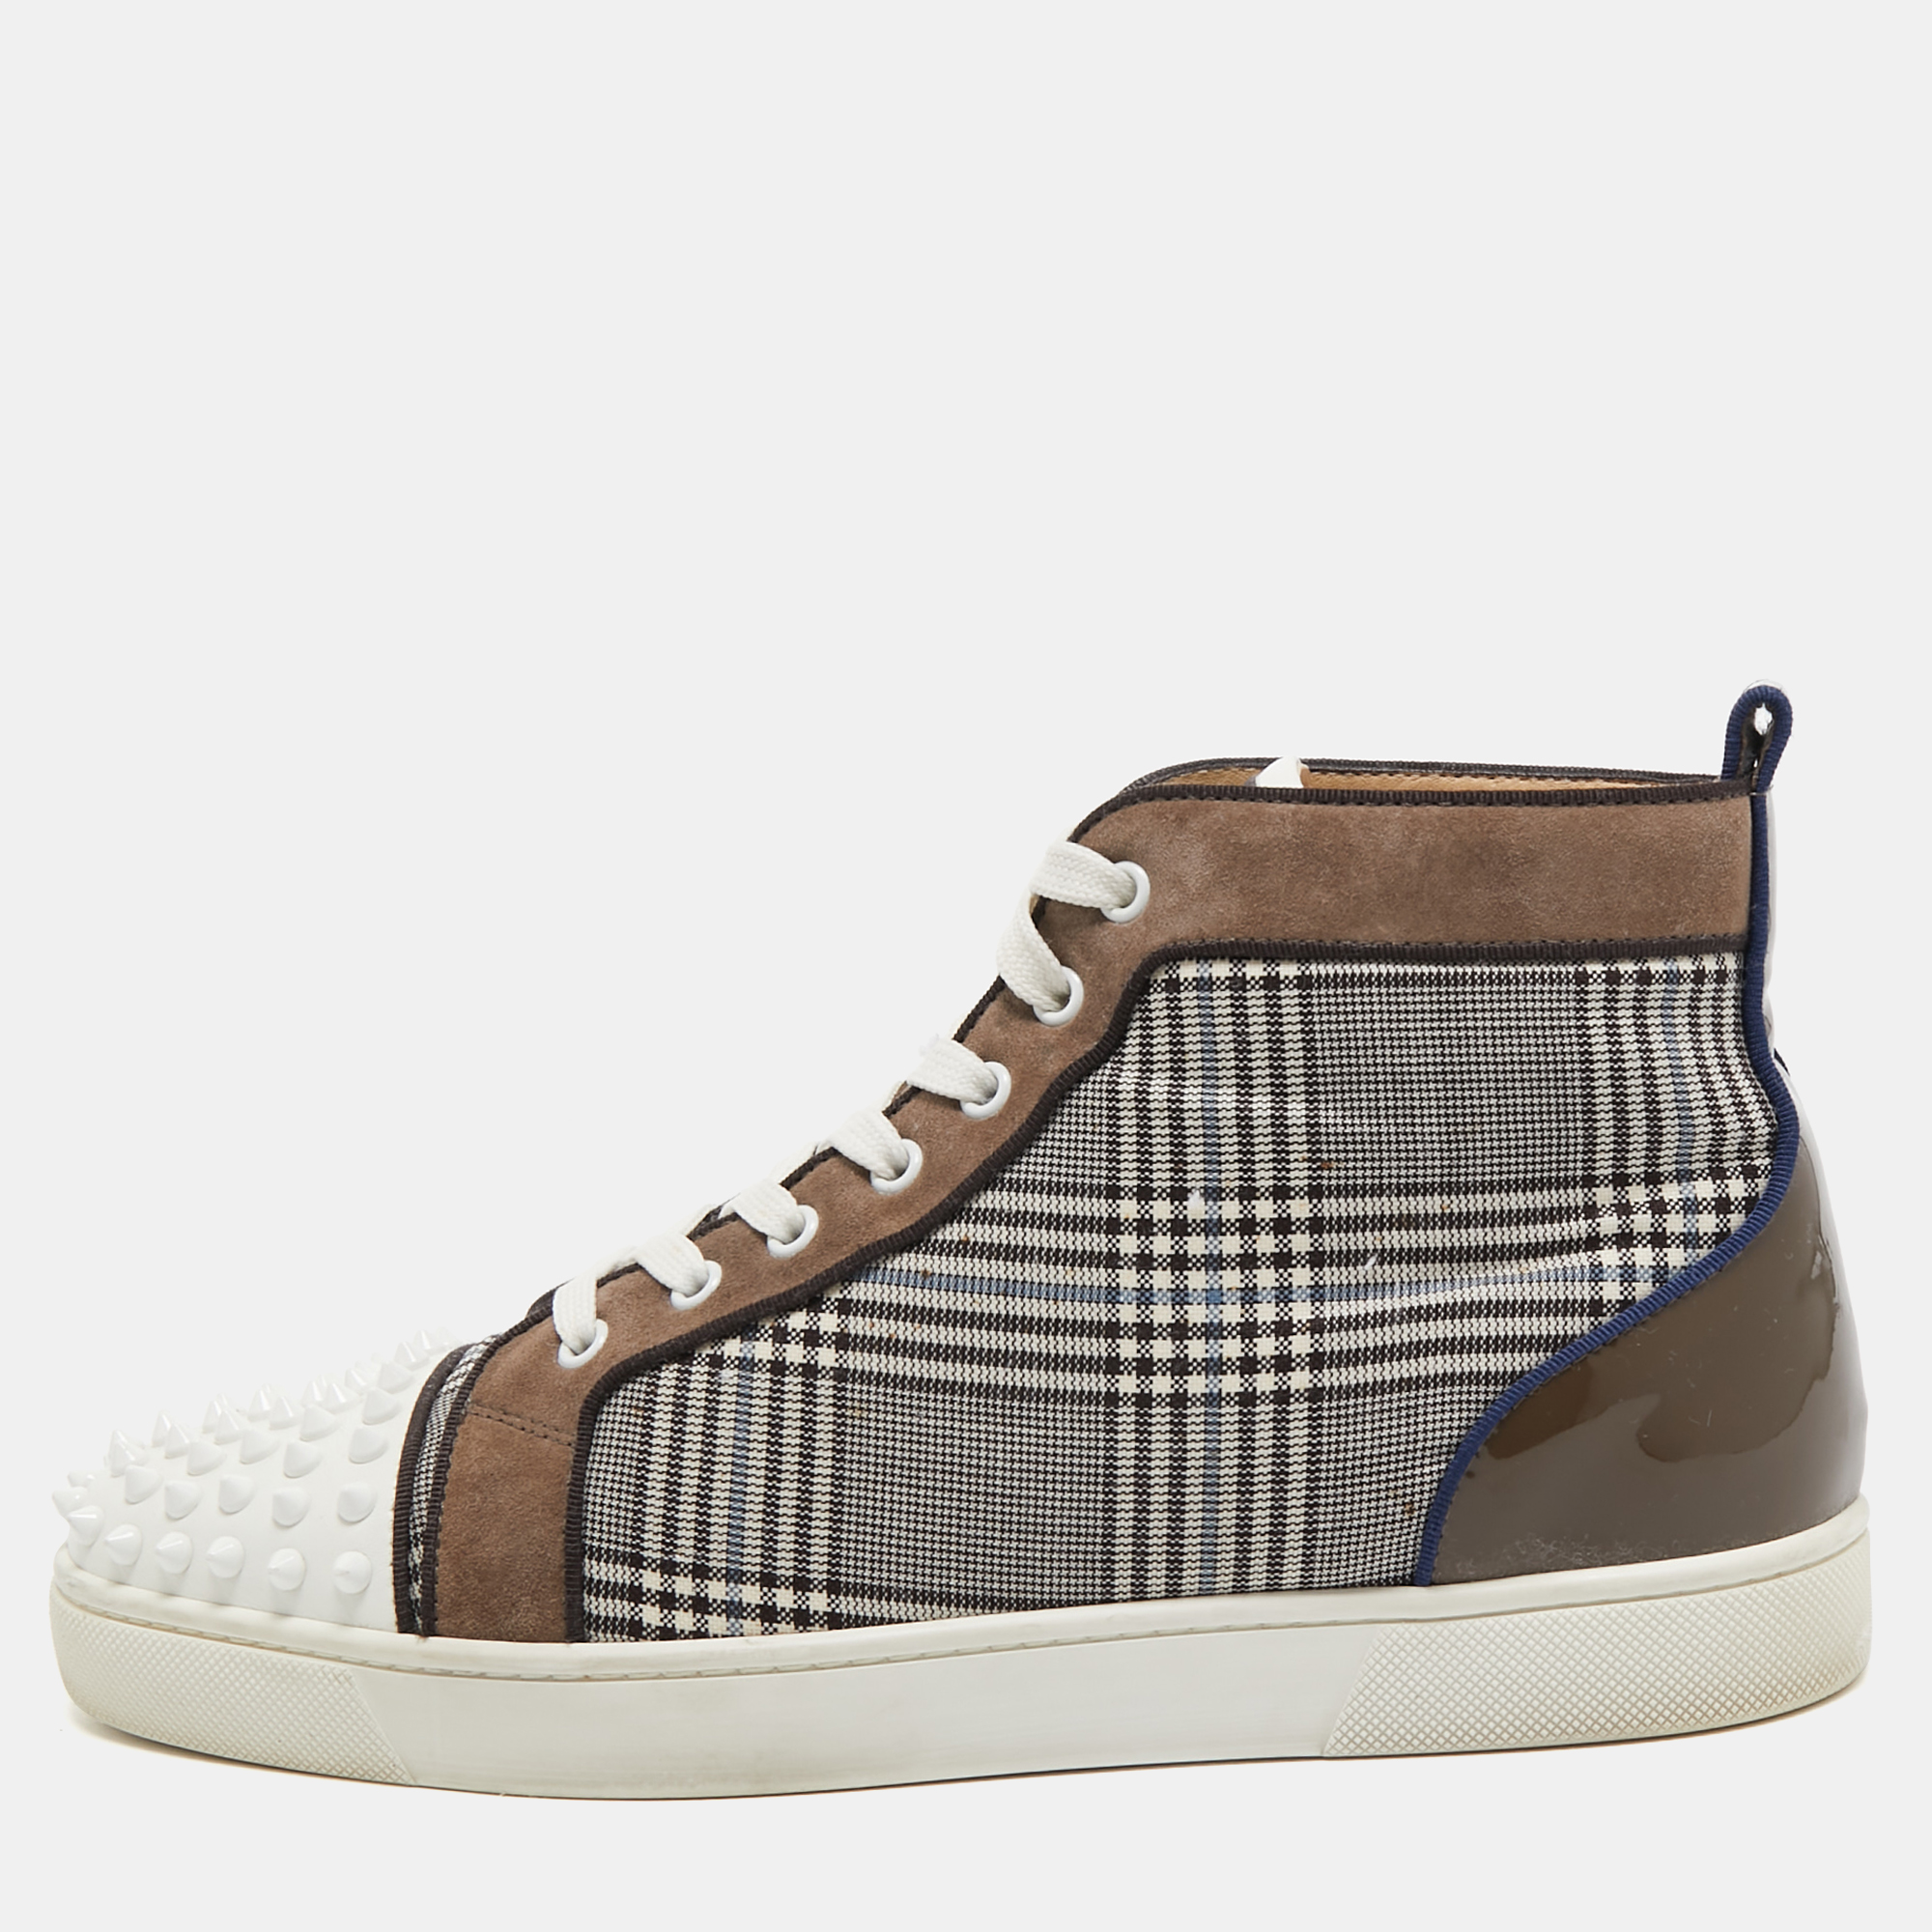 Pre-owned Christian Louboutin Multicolor Check Fabric And Leather Louis Spike High Top Sneakers Size 42.5